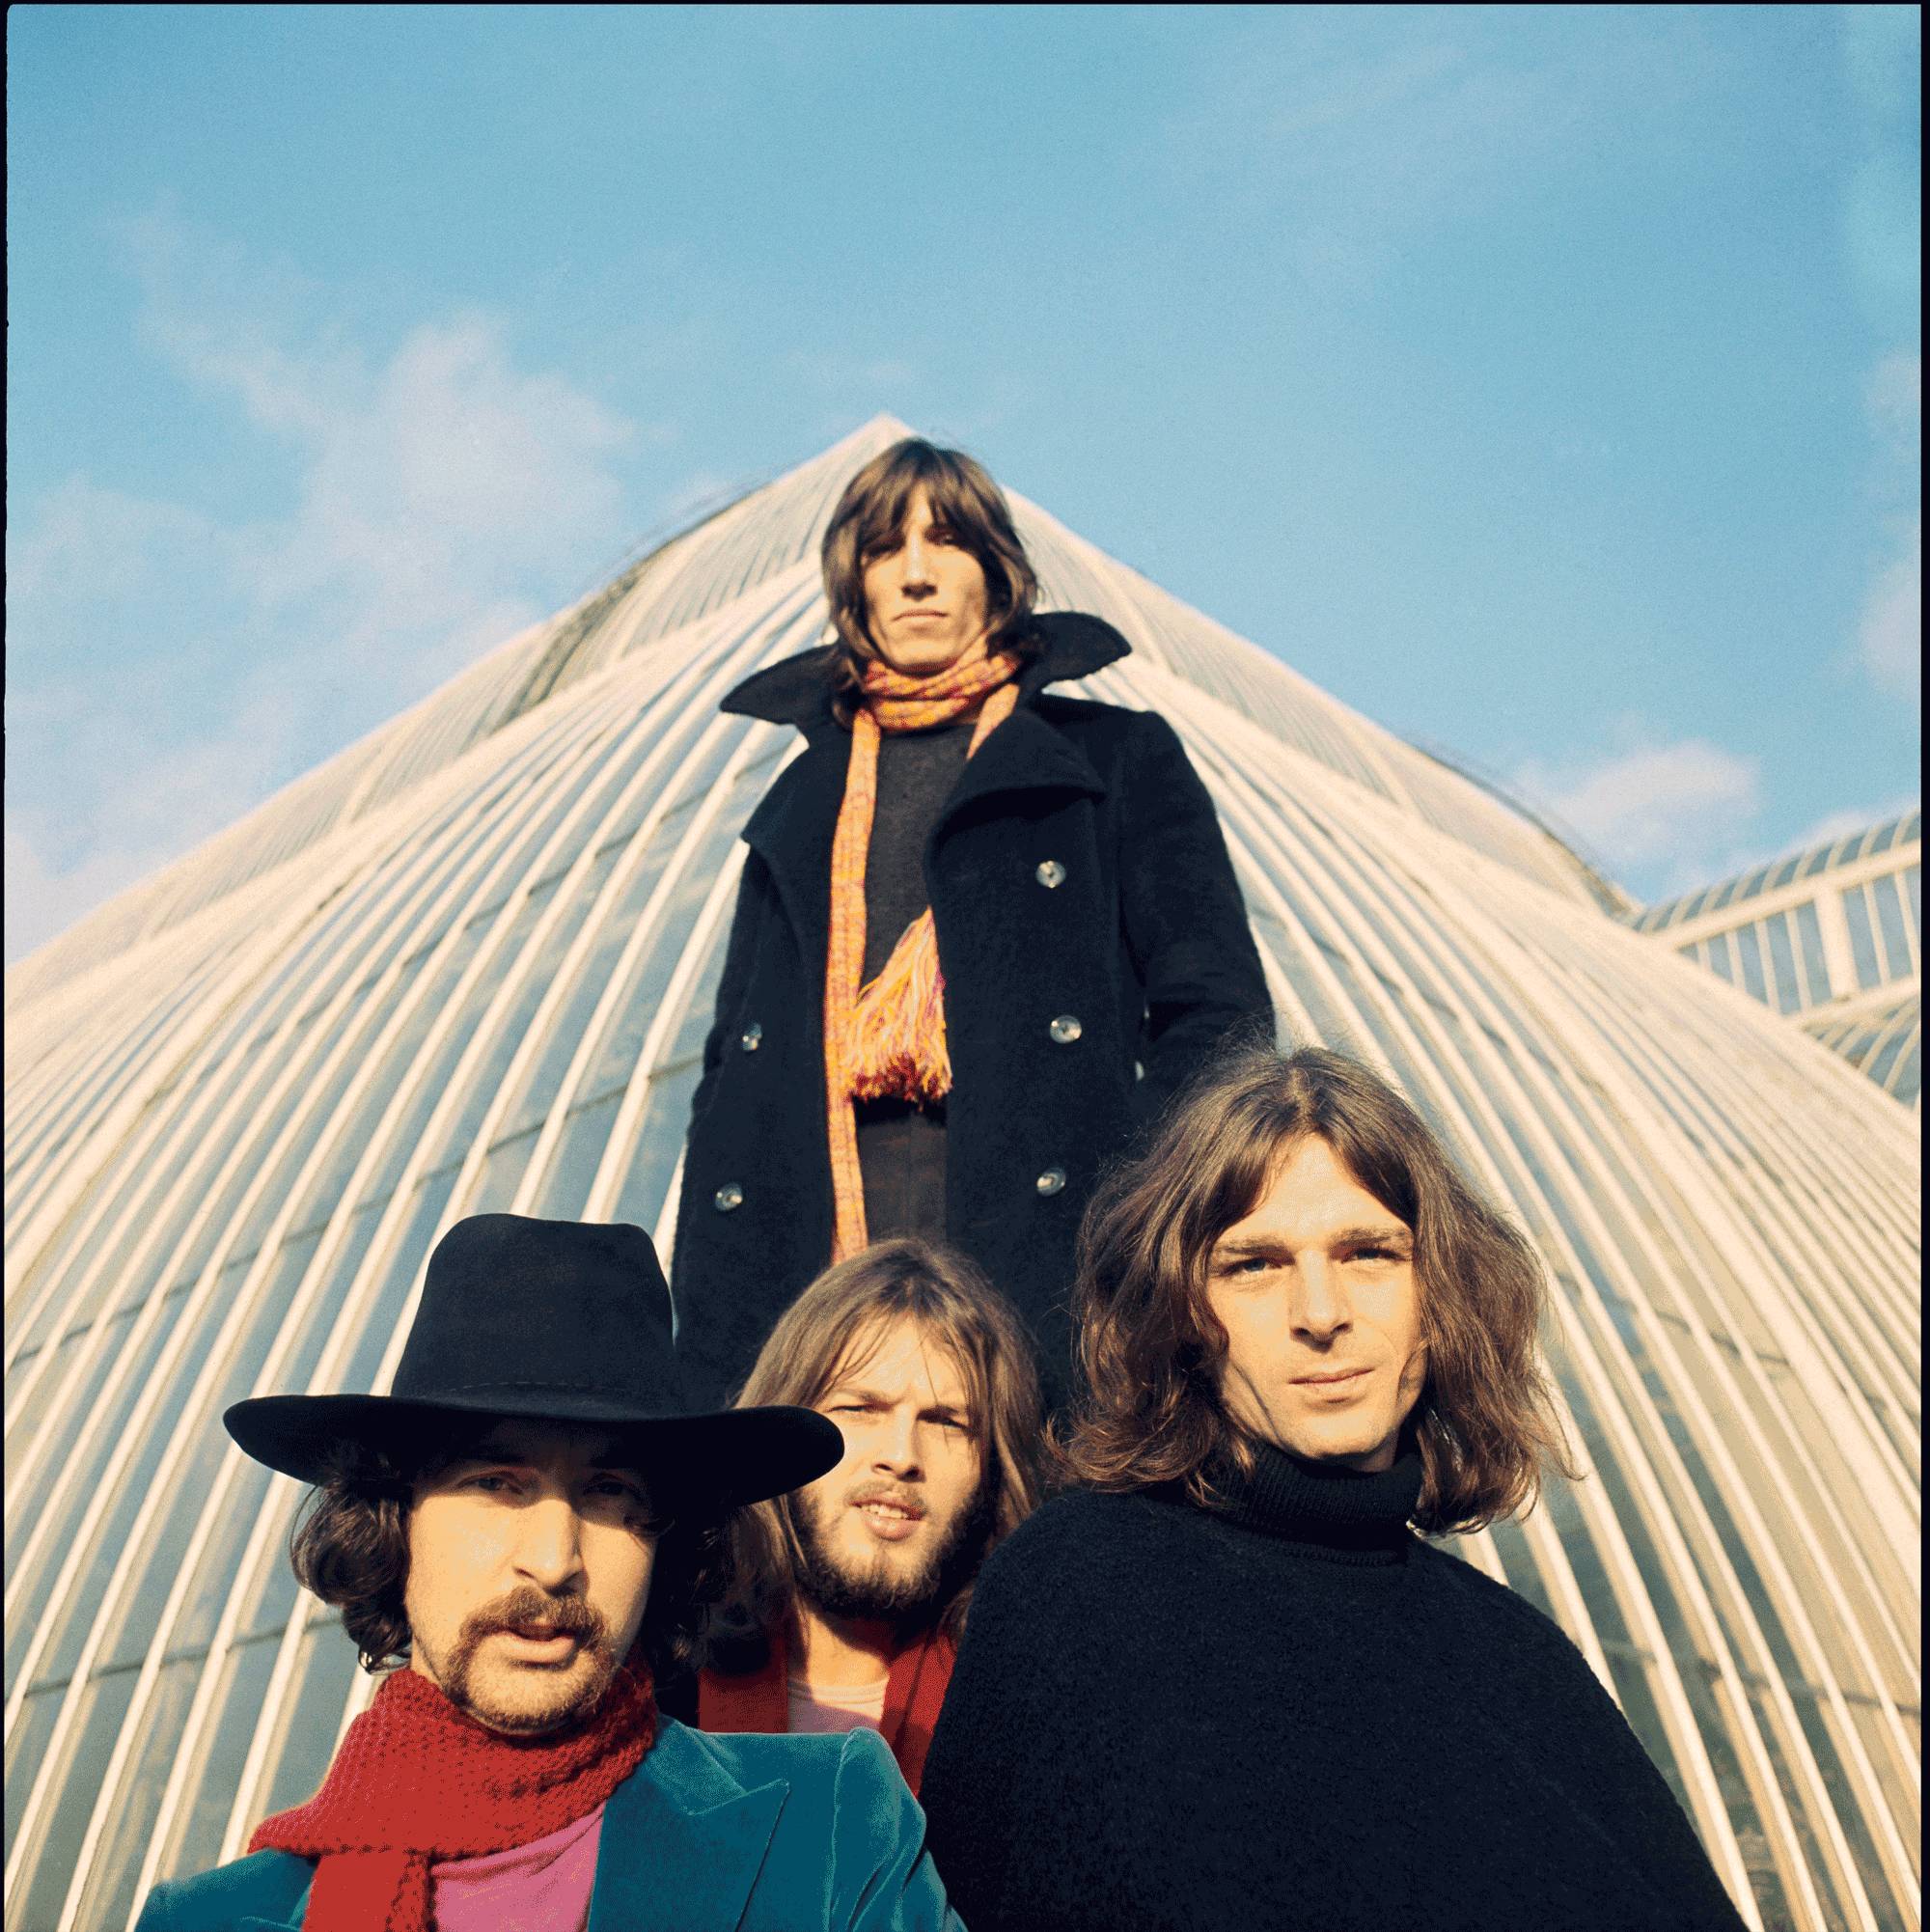 Courtesy of “The Pink Floyd Exhibition : Their Mortal Remains”